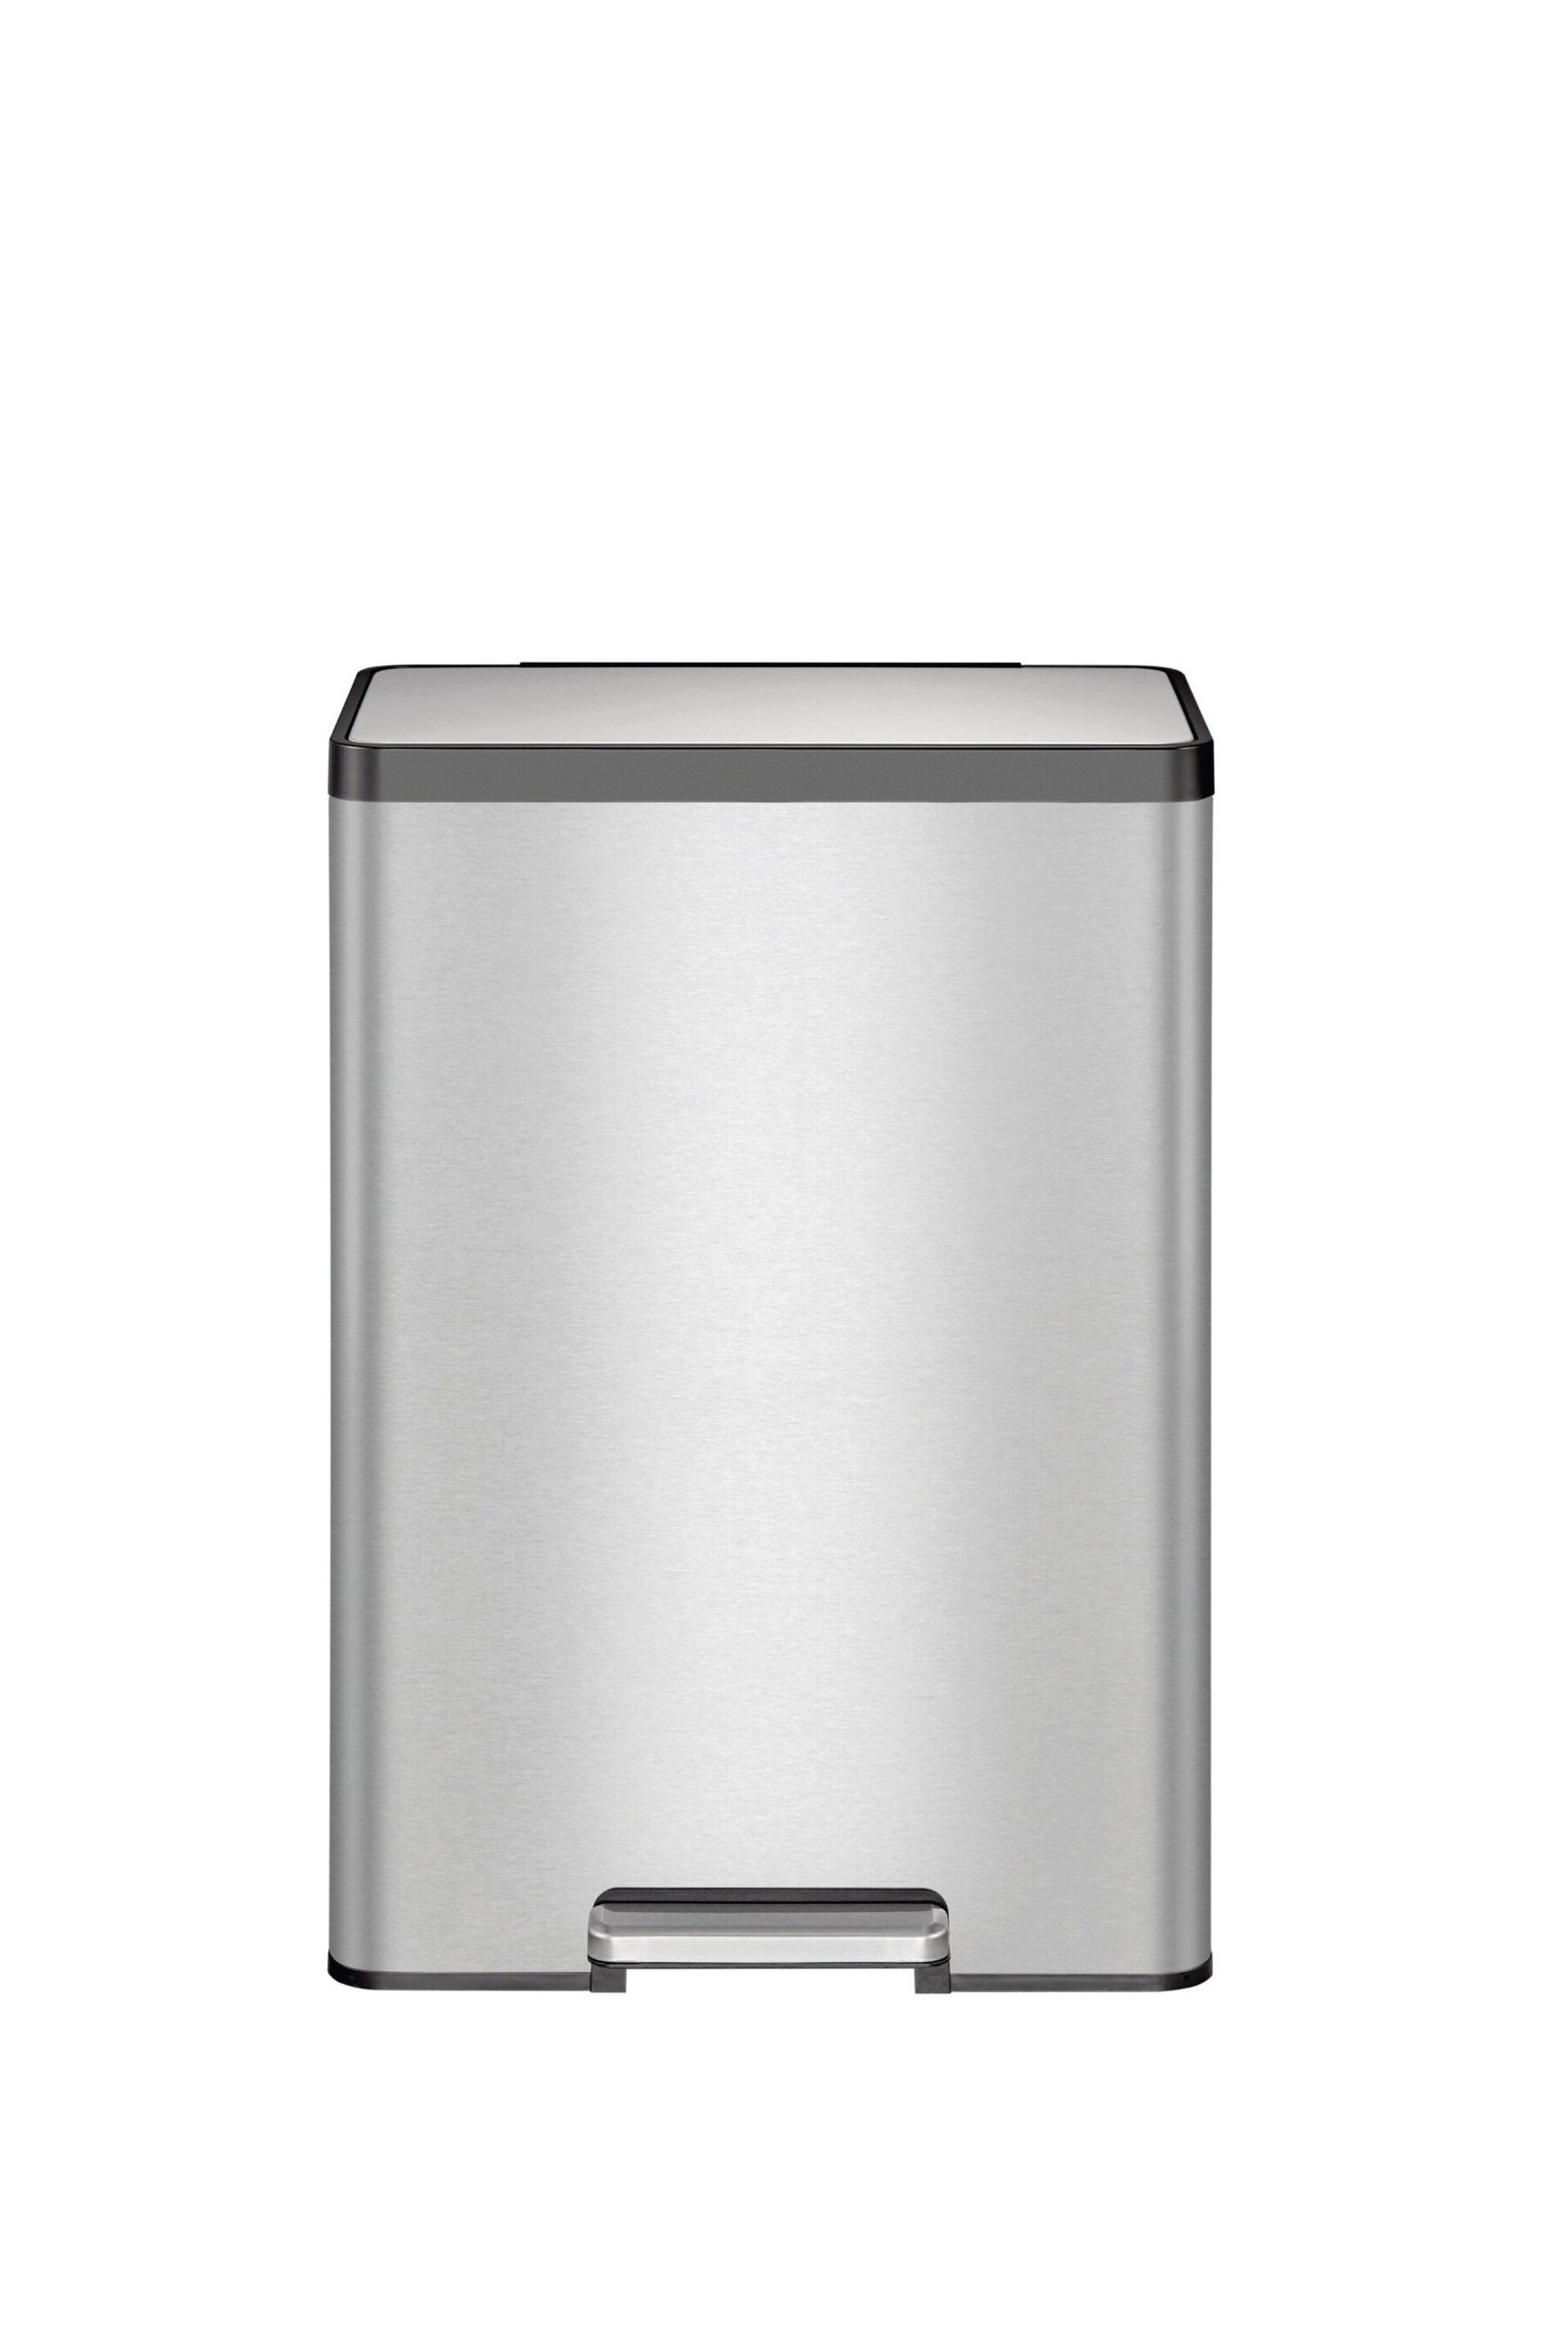 EKO Silver Stainless Steel Recycling 20+20 Litres Bin - Image 2 of 4